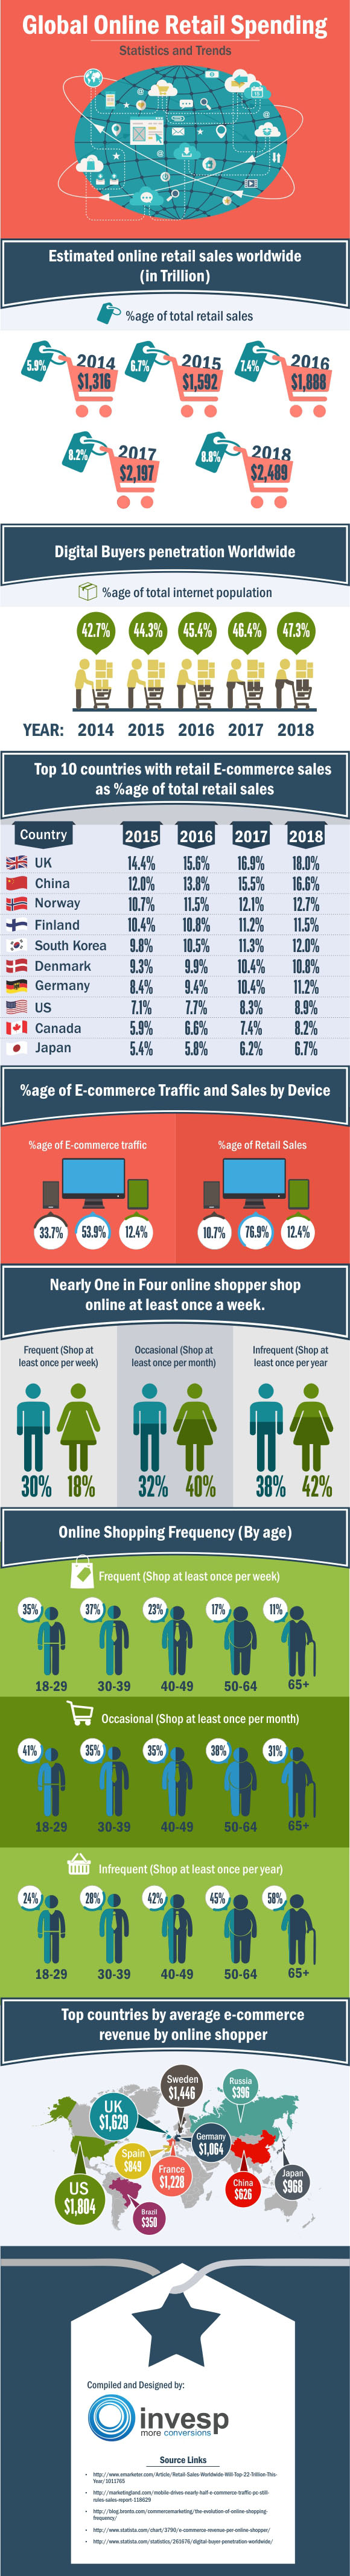 Global online retail spending Statistics and Trends